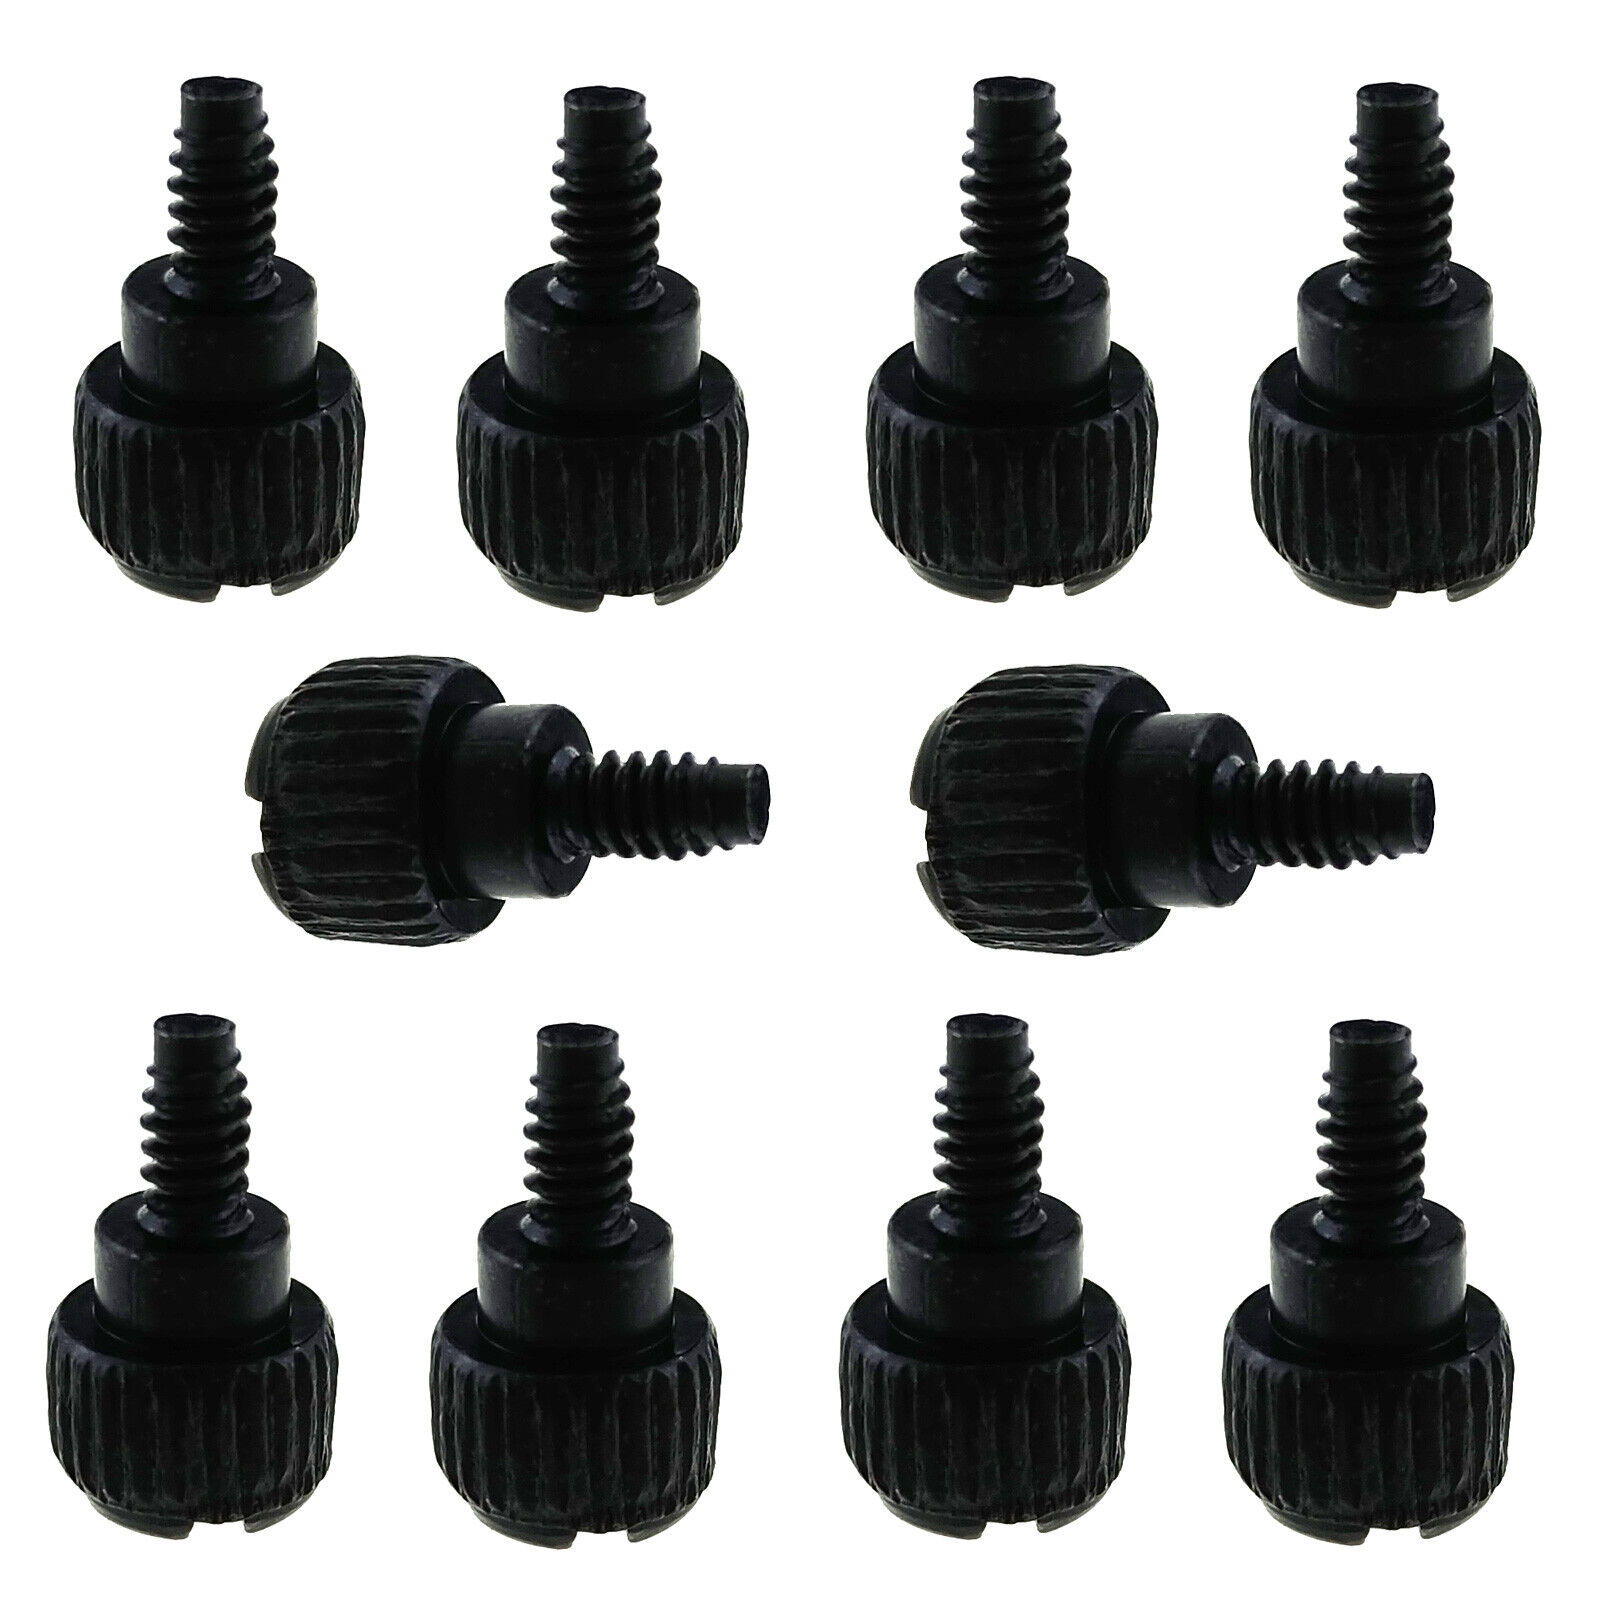 10pcs 6#-32 x6 Thumb Screws for PC Computer Case Panel Remove by Hand Tool Free